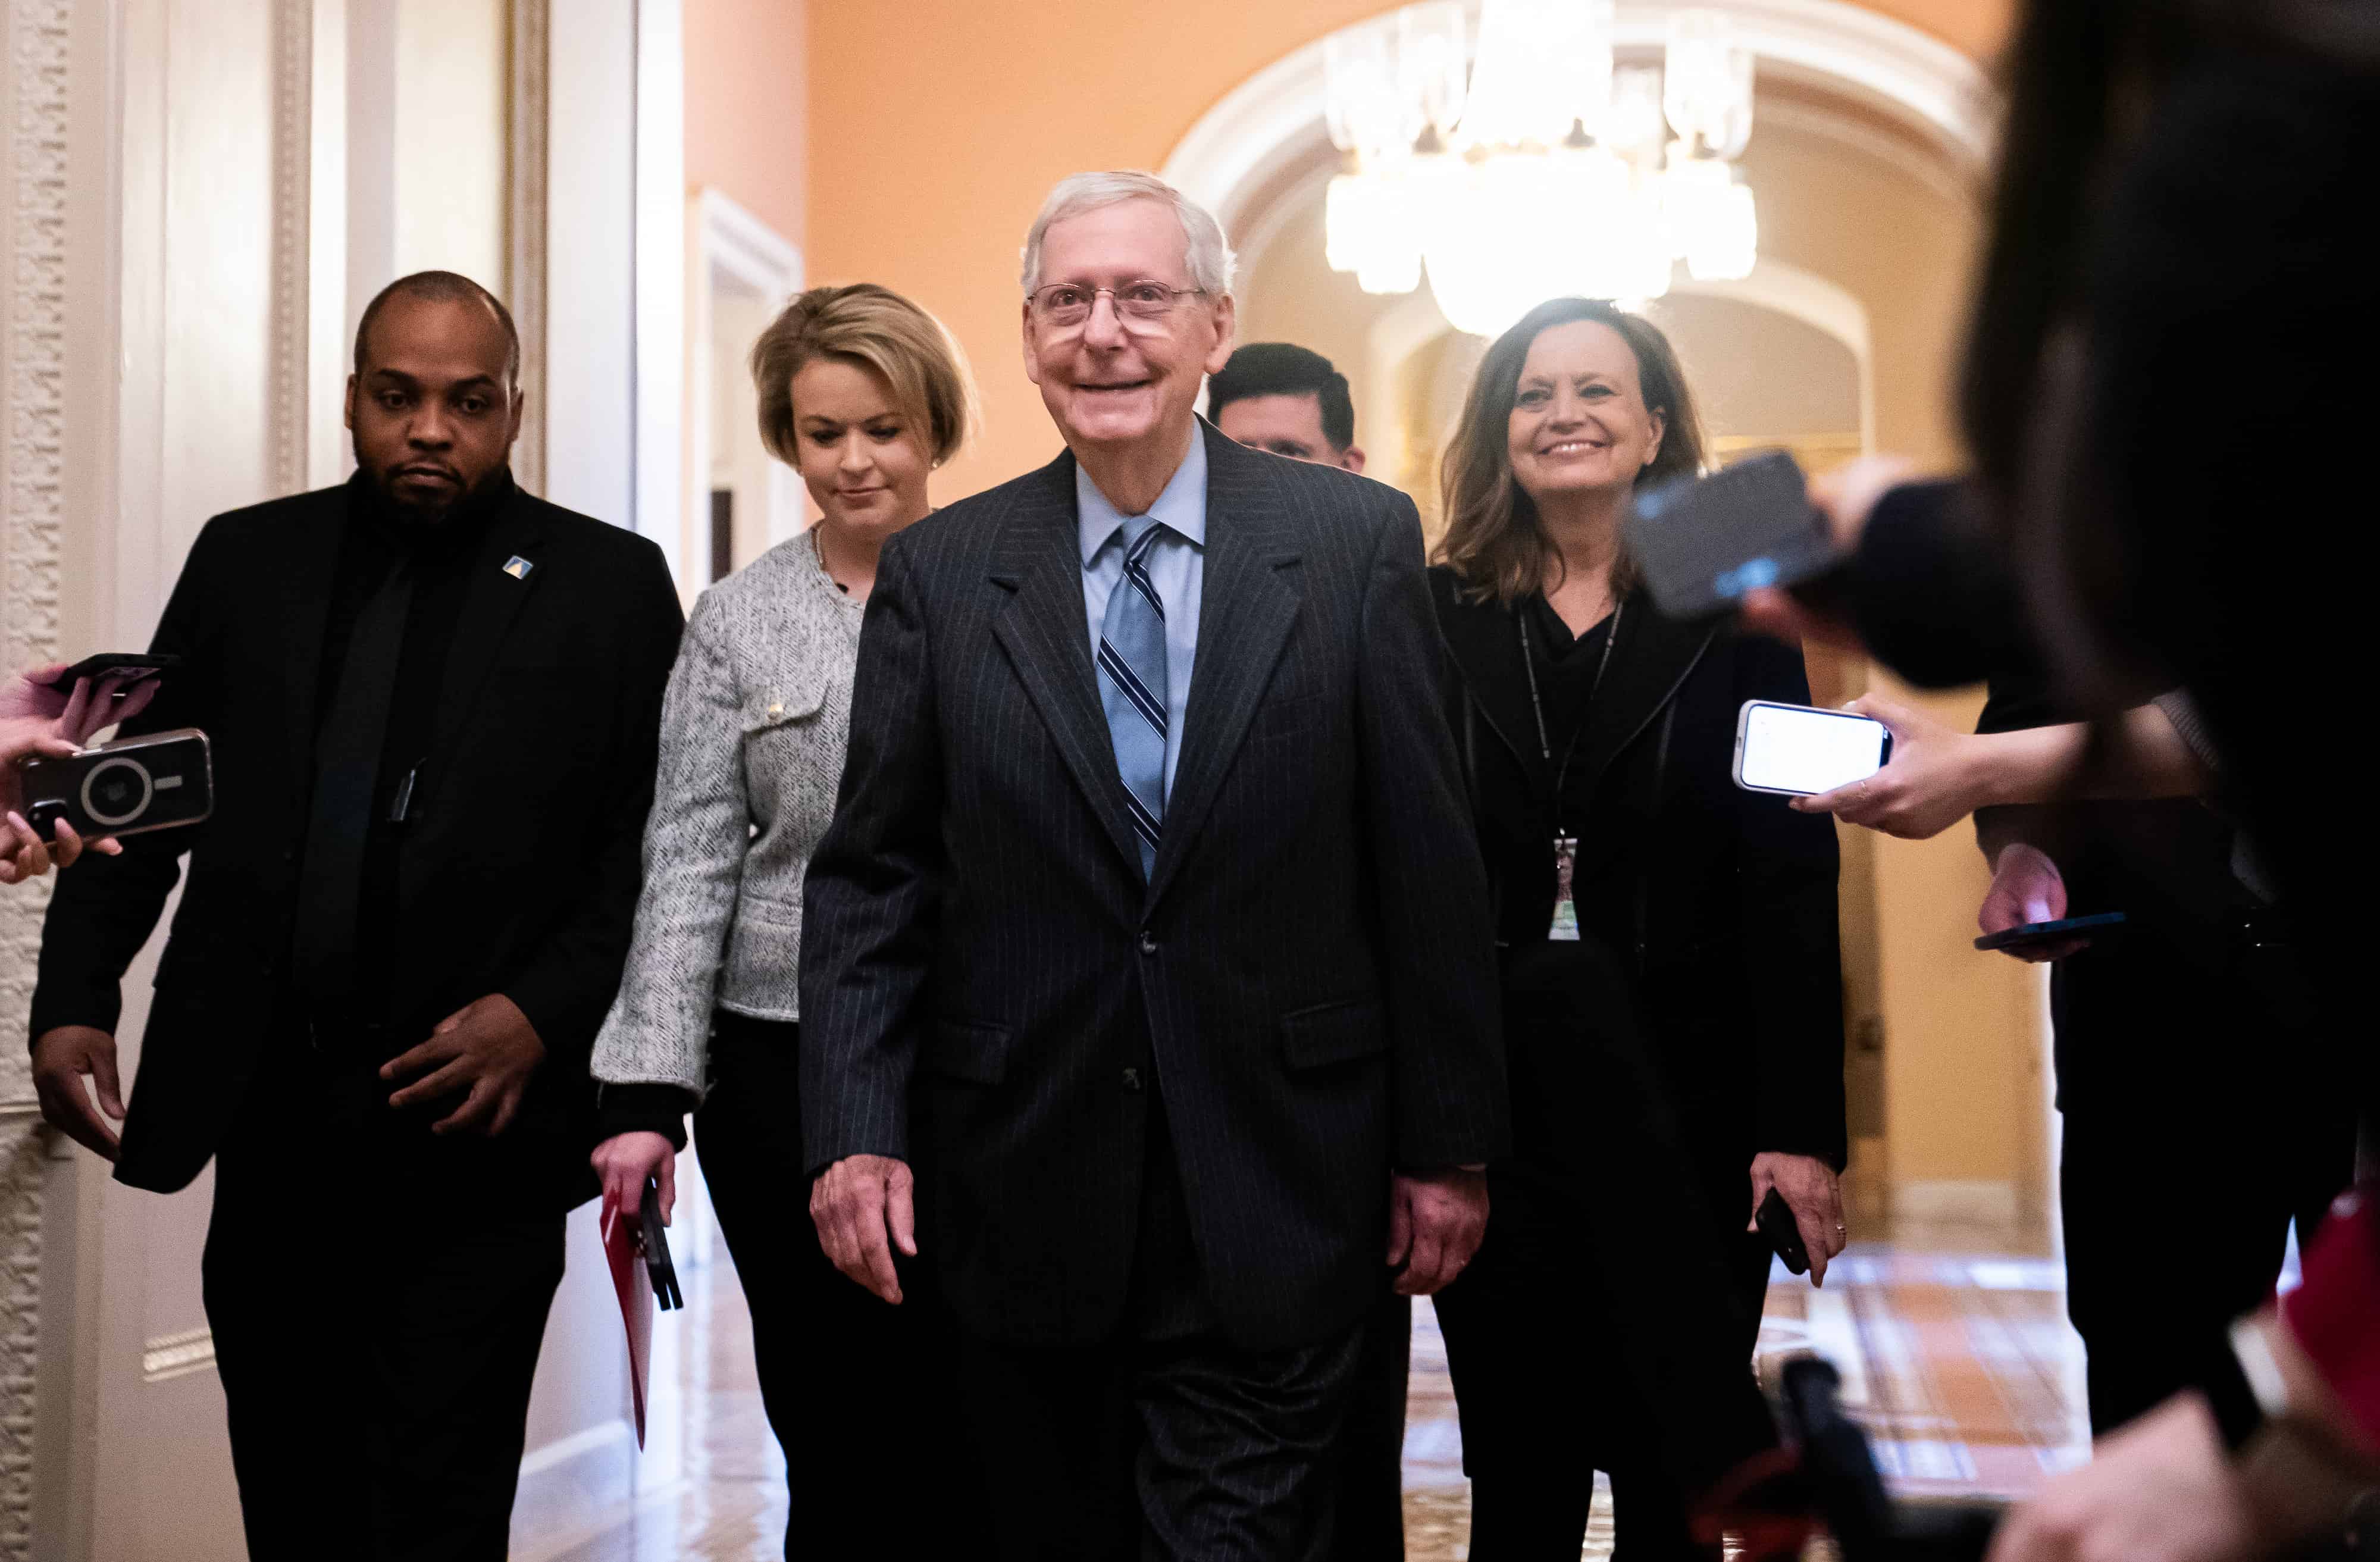 McConnell to Step Down as Senate Minority Leader in November